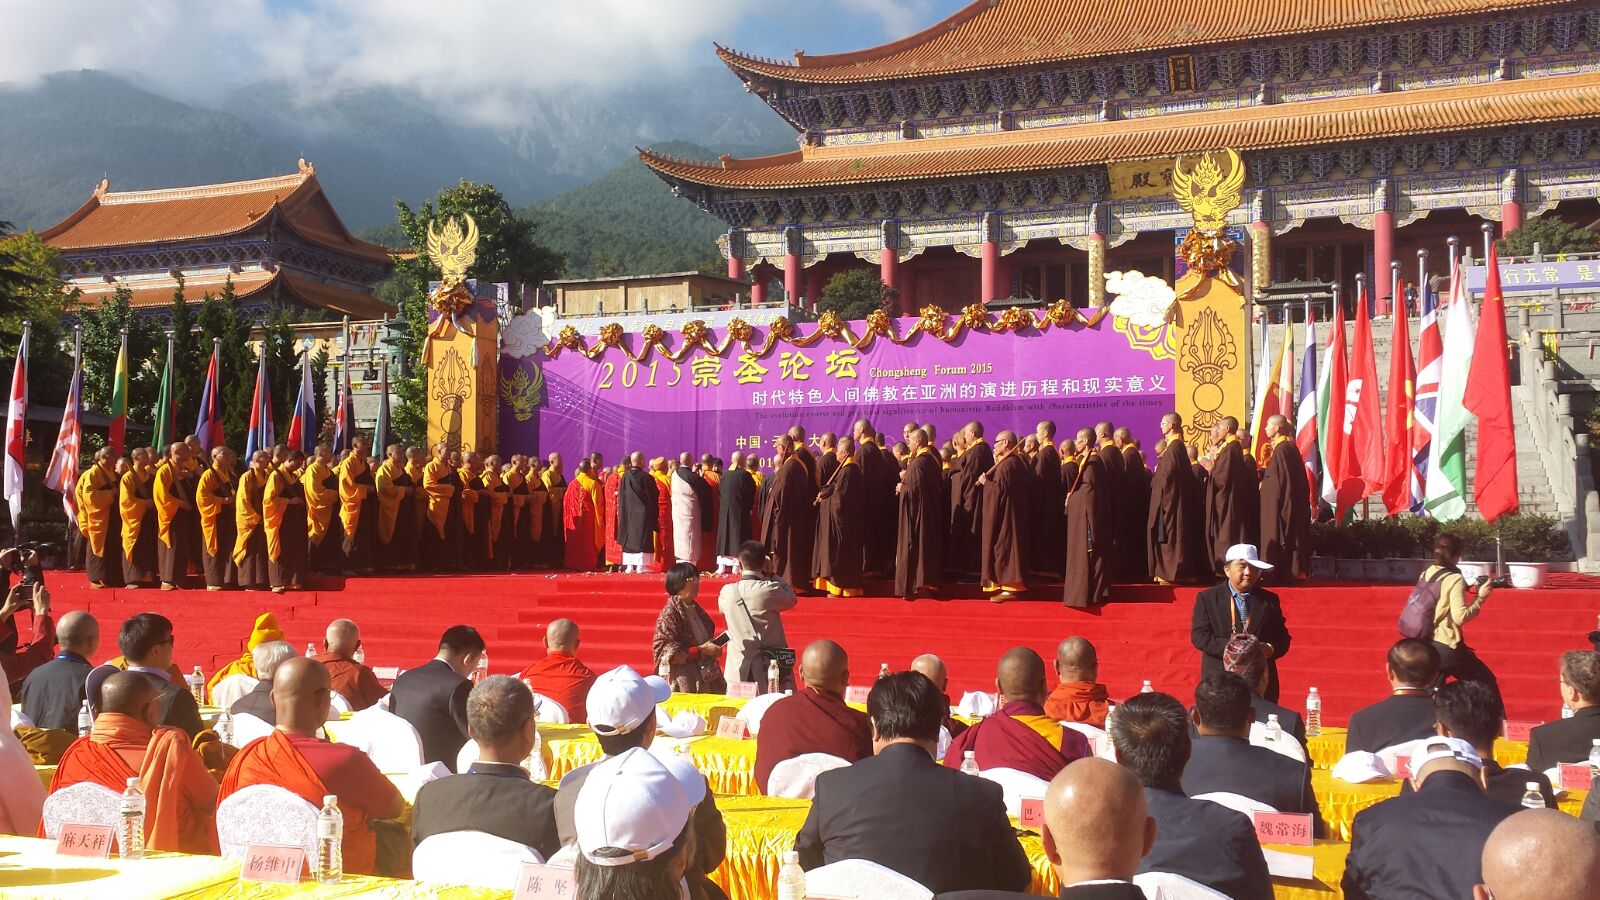 You are currently viewing 3rd Chongsheng International Buddhist Forum, 2015